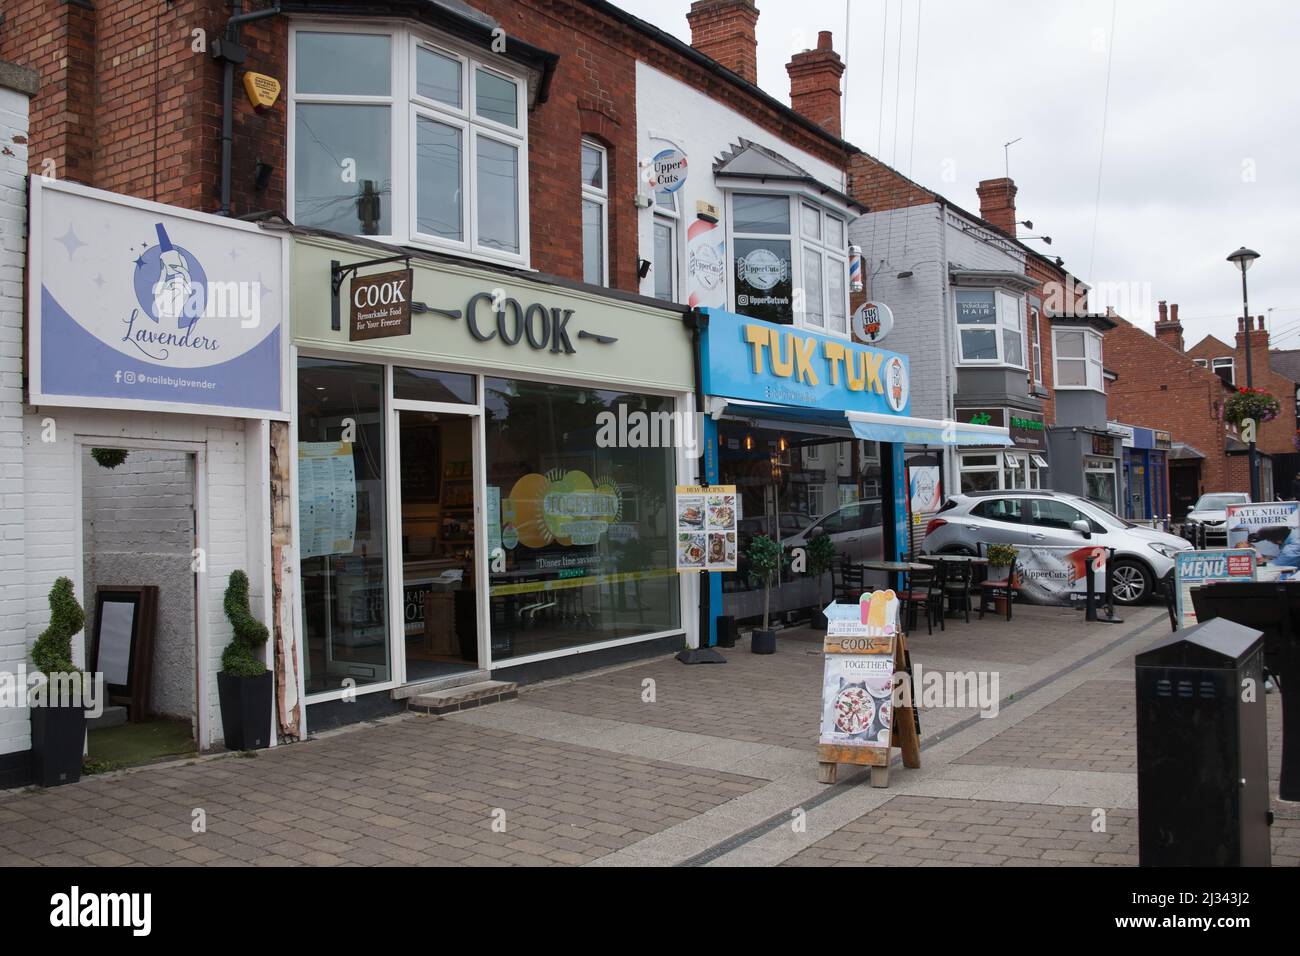 A row of shops and restaurants in West Bridgford, Nottinghamshire in the UK Stock Photo